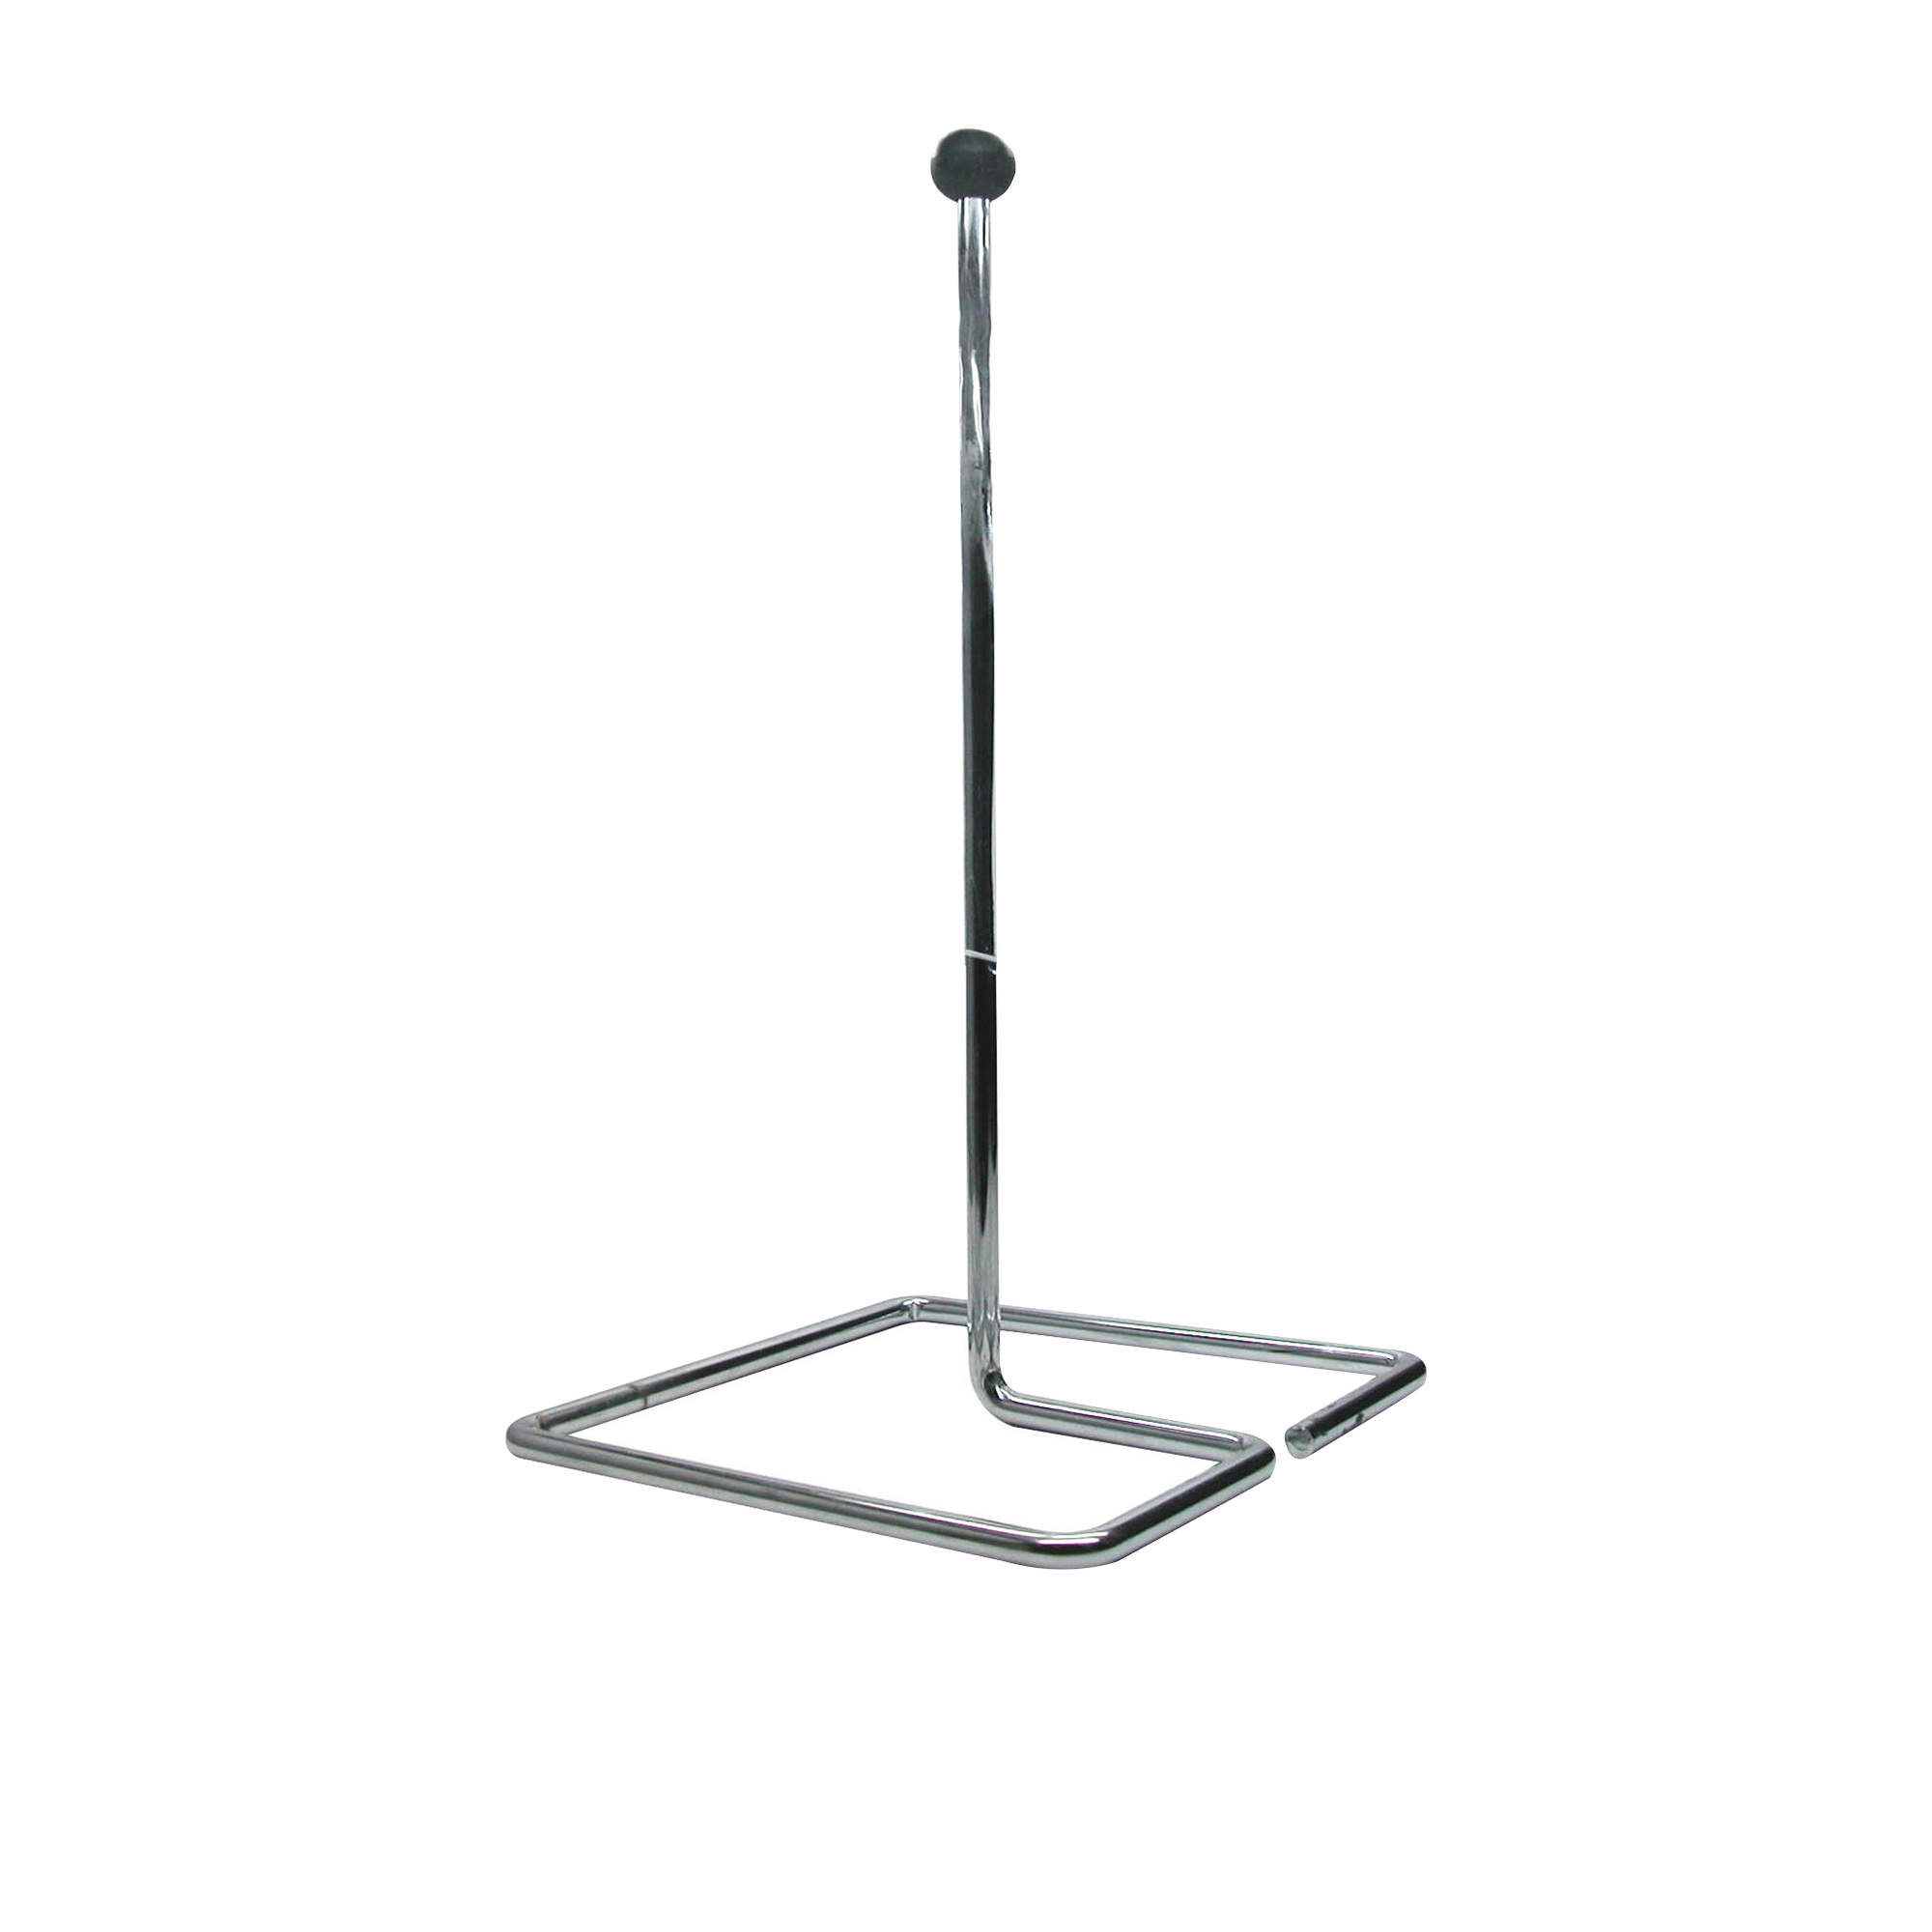 Winex Decanter Drying Stand Image 1